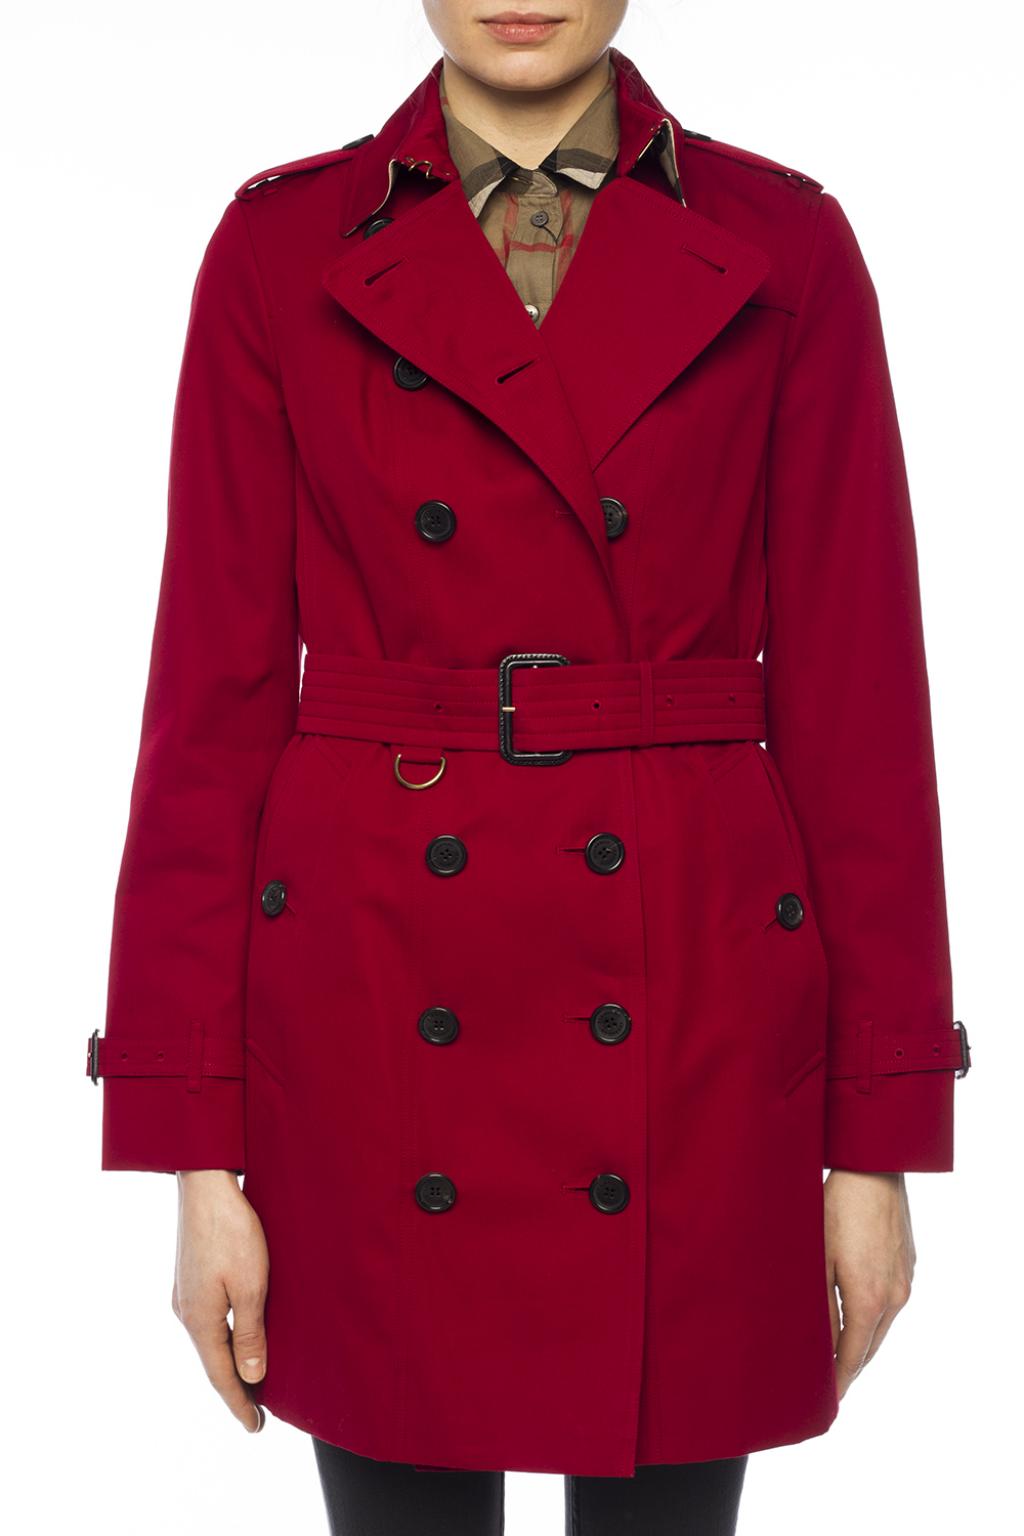 Red 'Kensington' double-breasted trench coat Burberry - Vitkac France